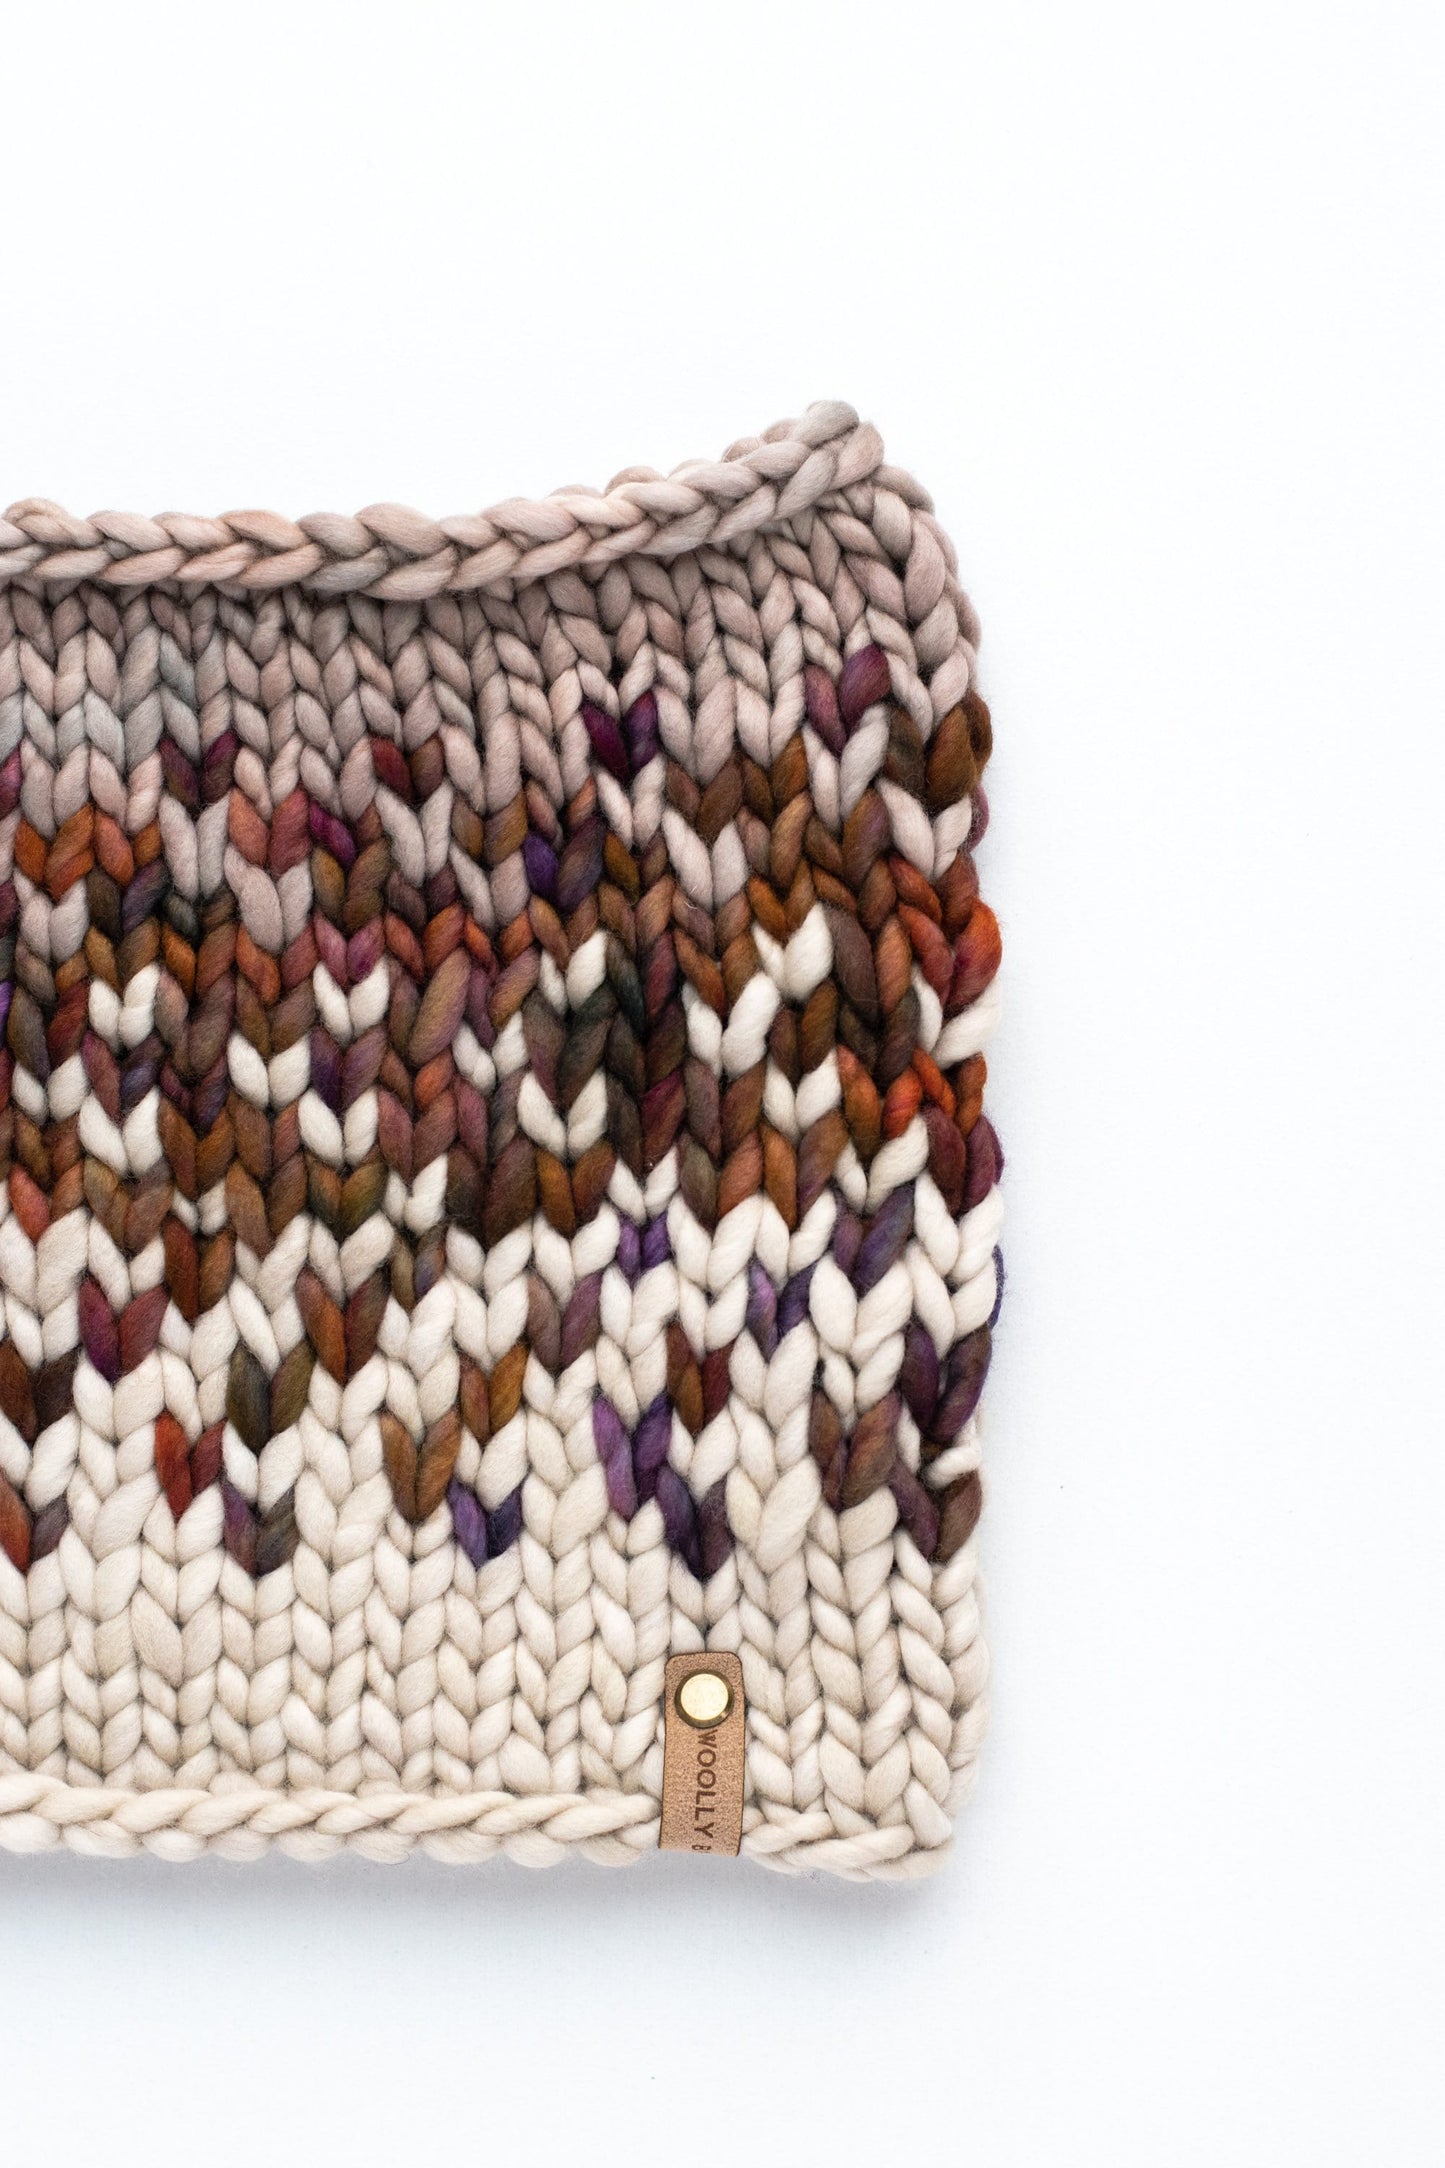 Gray and Brown Multicolor Merino Wool Fair Isle Hand Knit Cowl